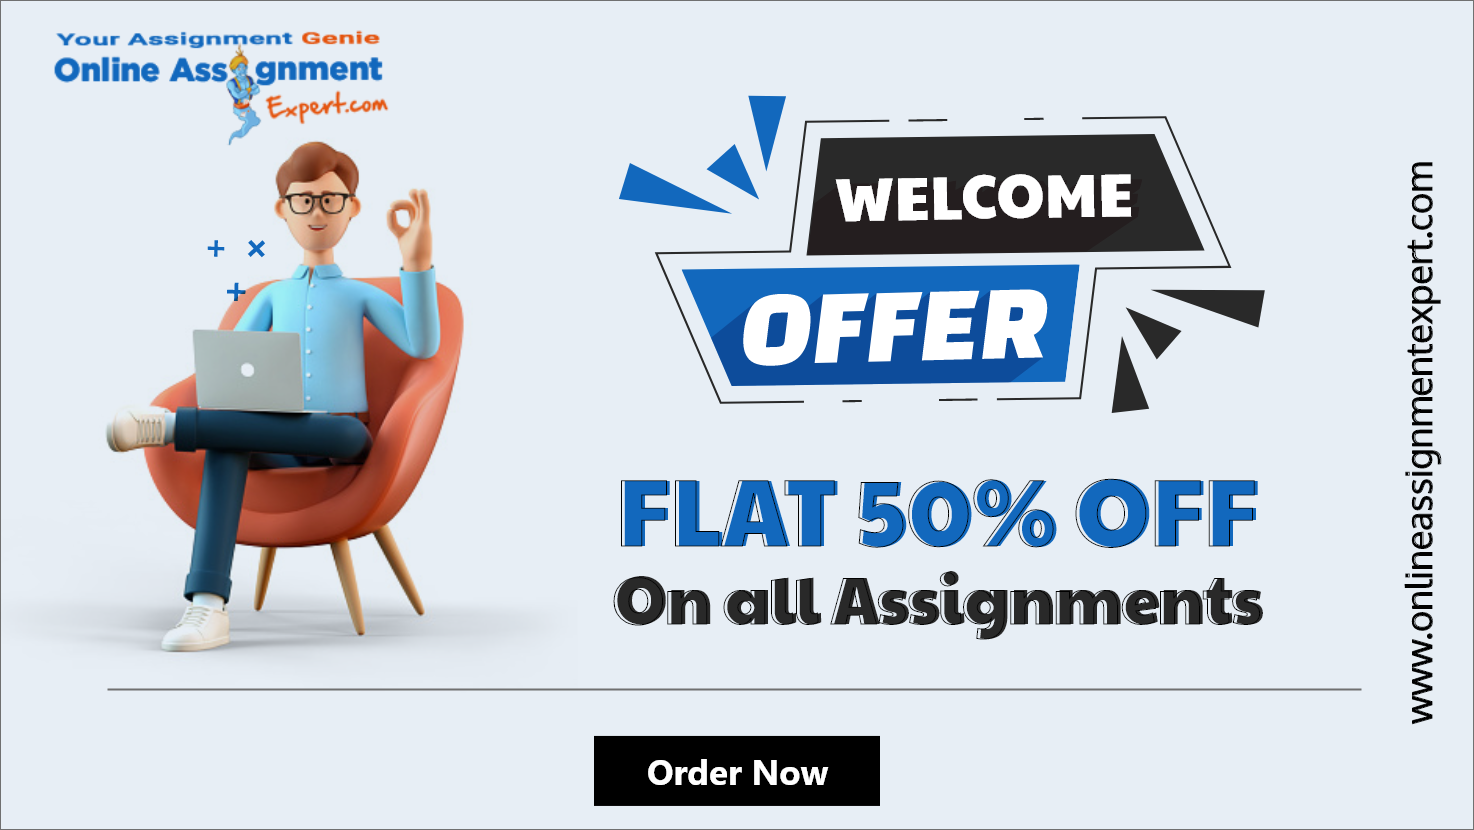 Get FLAT 50% OFF On All Assignments With Online Assignment Expert's Welcome Offer